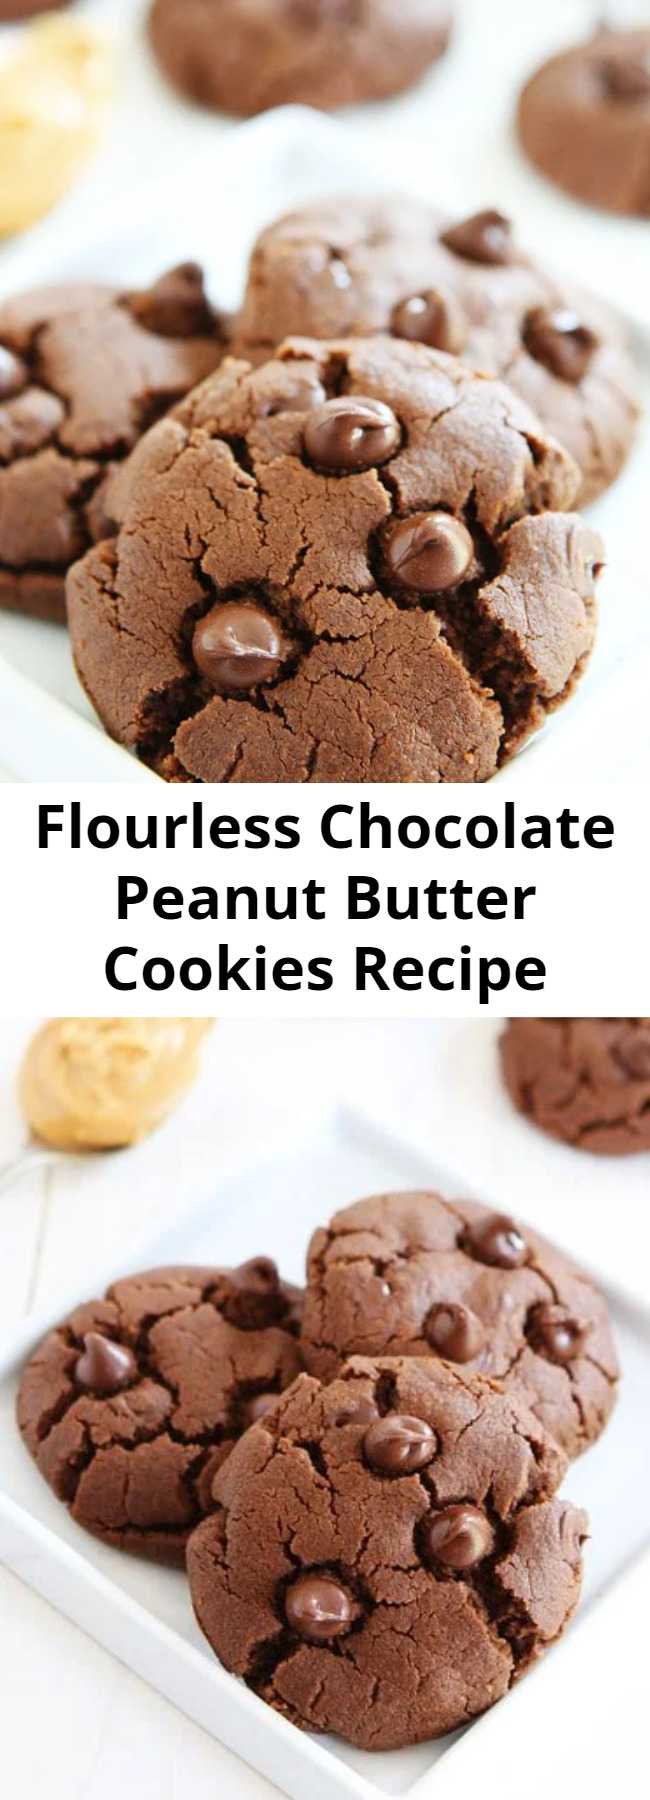 Flourless Chocolate Peanut Butter Cookies Recipe - Flourless Chocolate Peanut Butter Cookies – you will never know these rich and fudgy chocolate peanut butter cookies are gluten free. They are insanely delicious! #Cookies #Chocolate #Peanut_Butter #Flourless